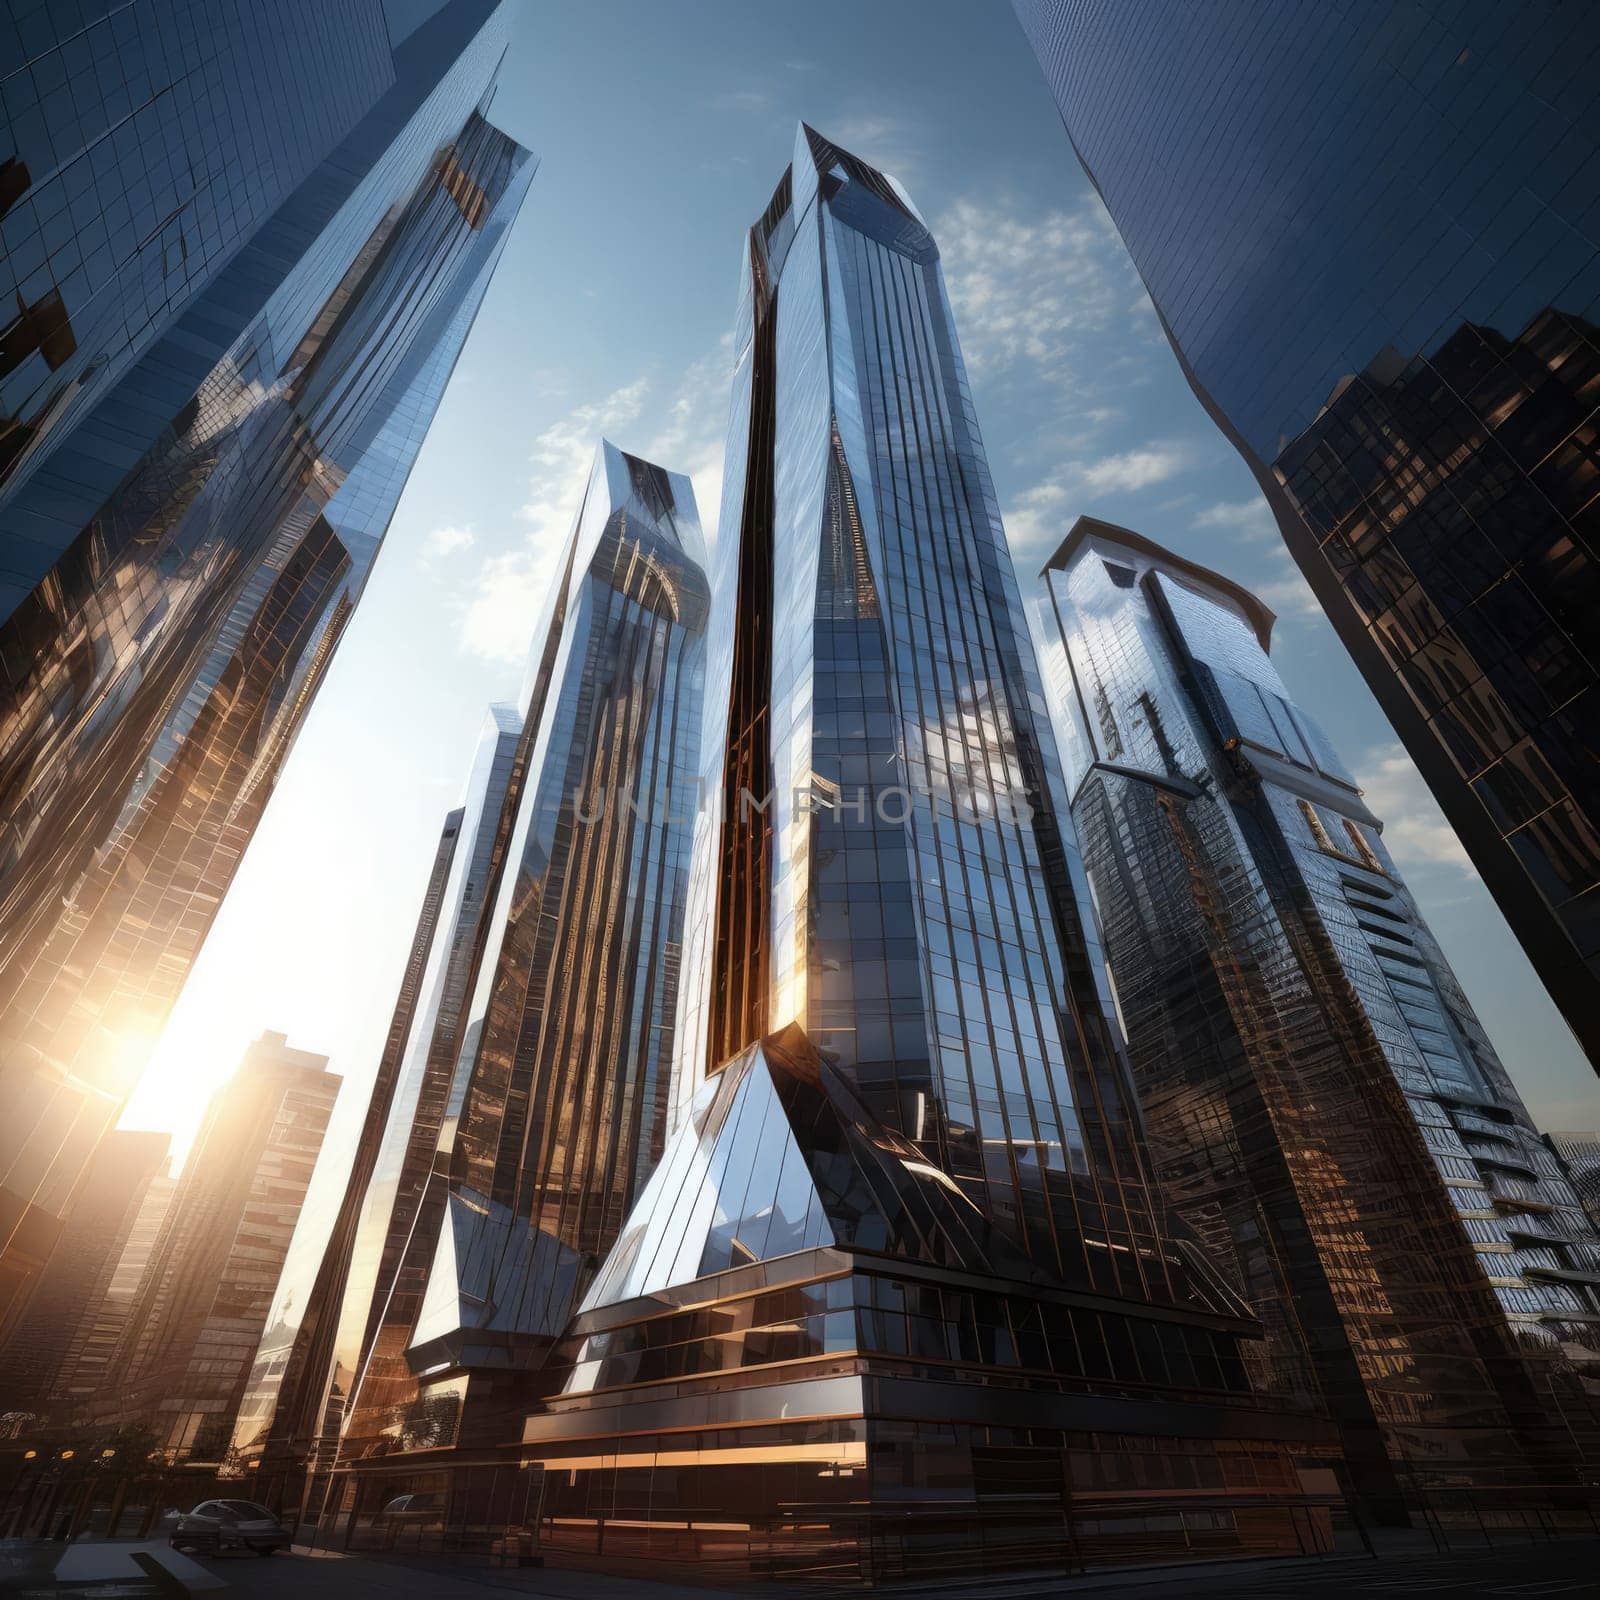 A group of skyscrapers of the future. Sunny day. The business concept of the future